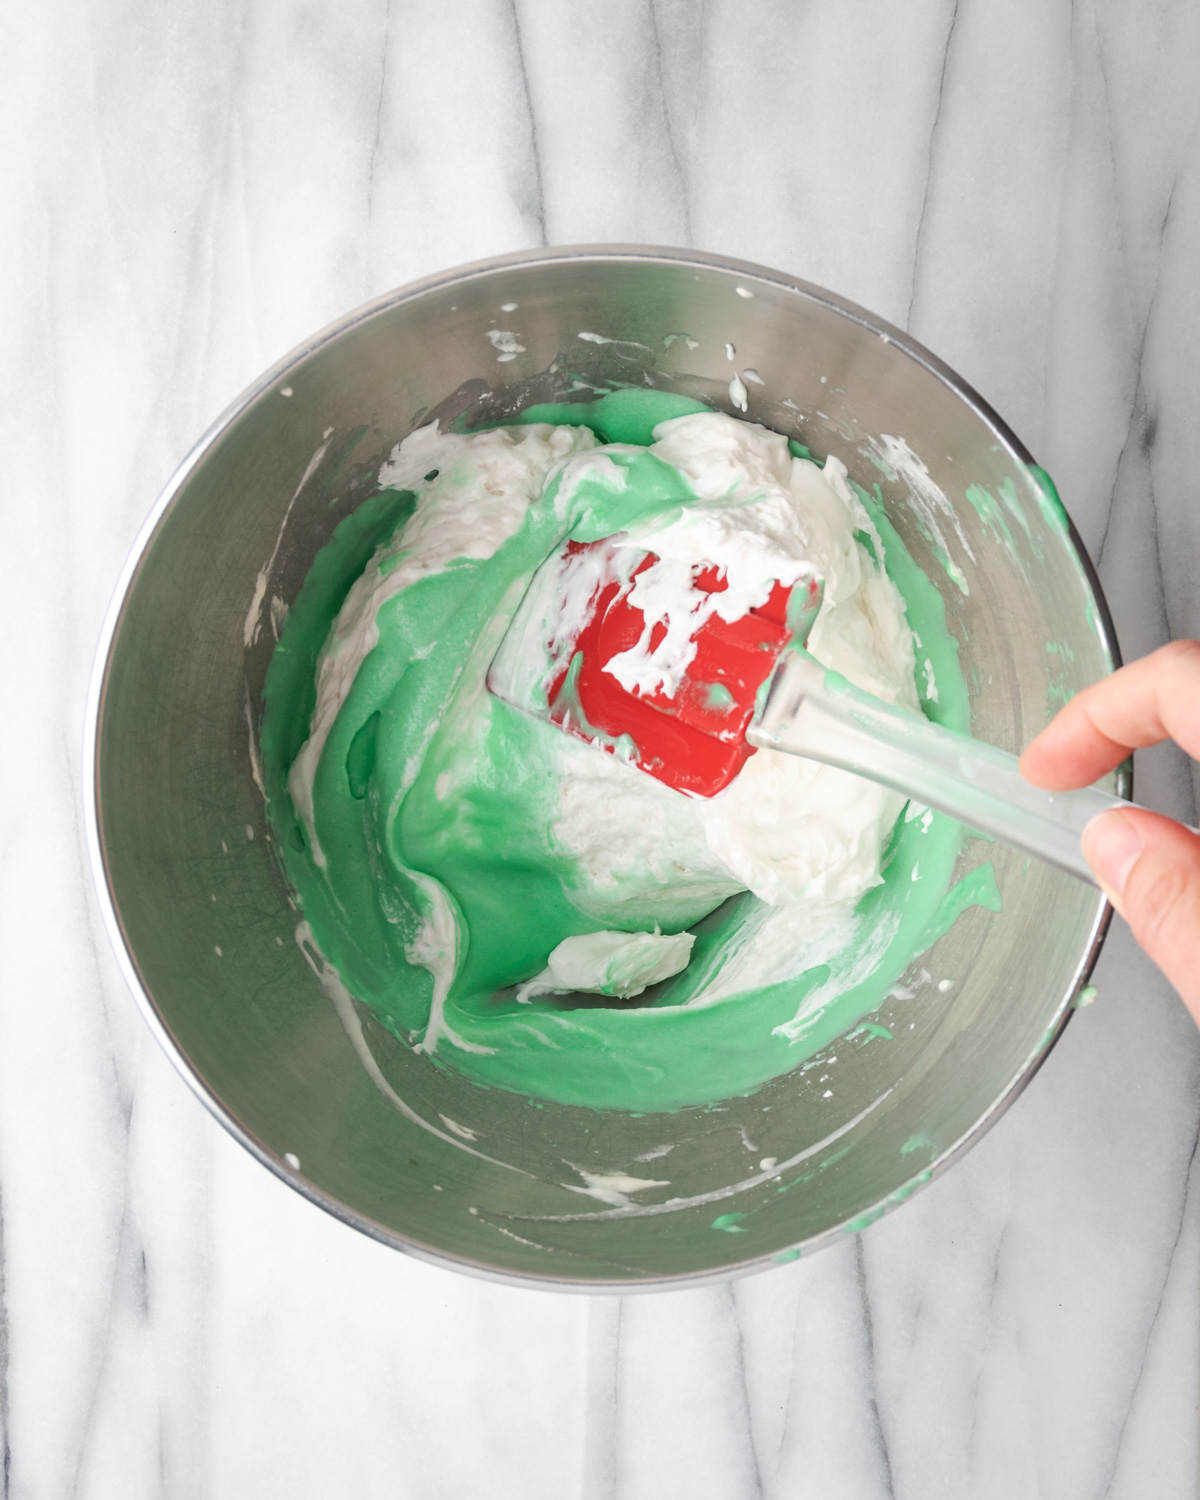 Spatula folding whipped cream into green pie filling.